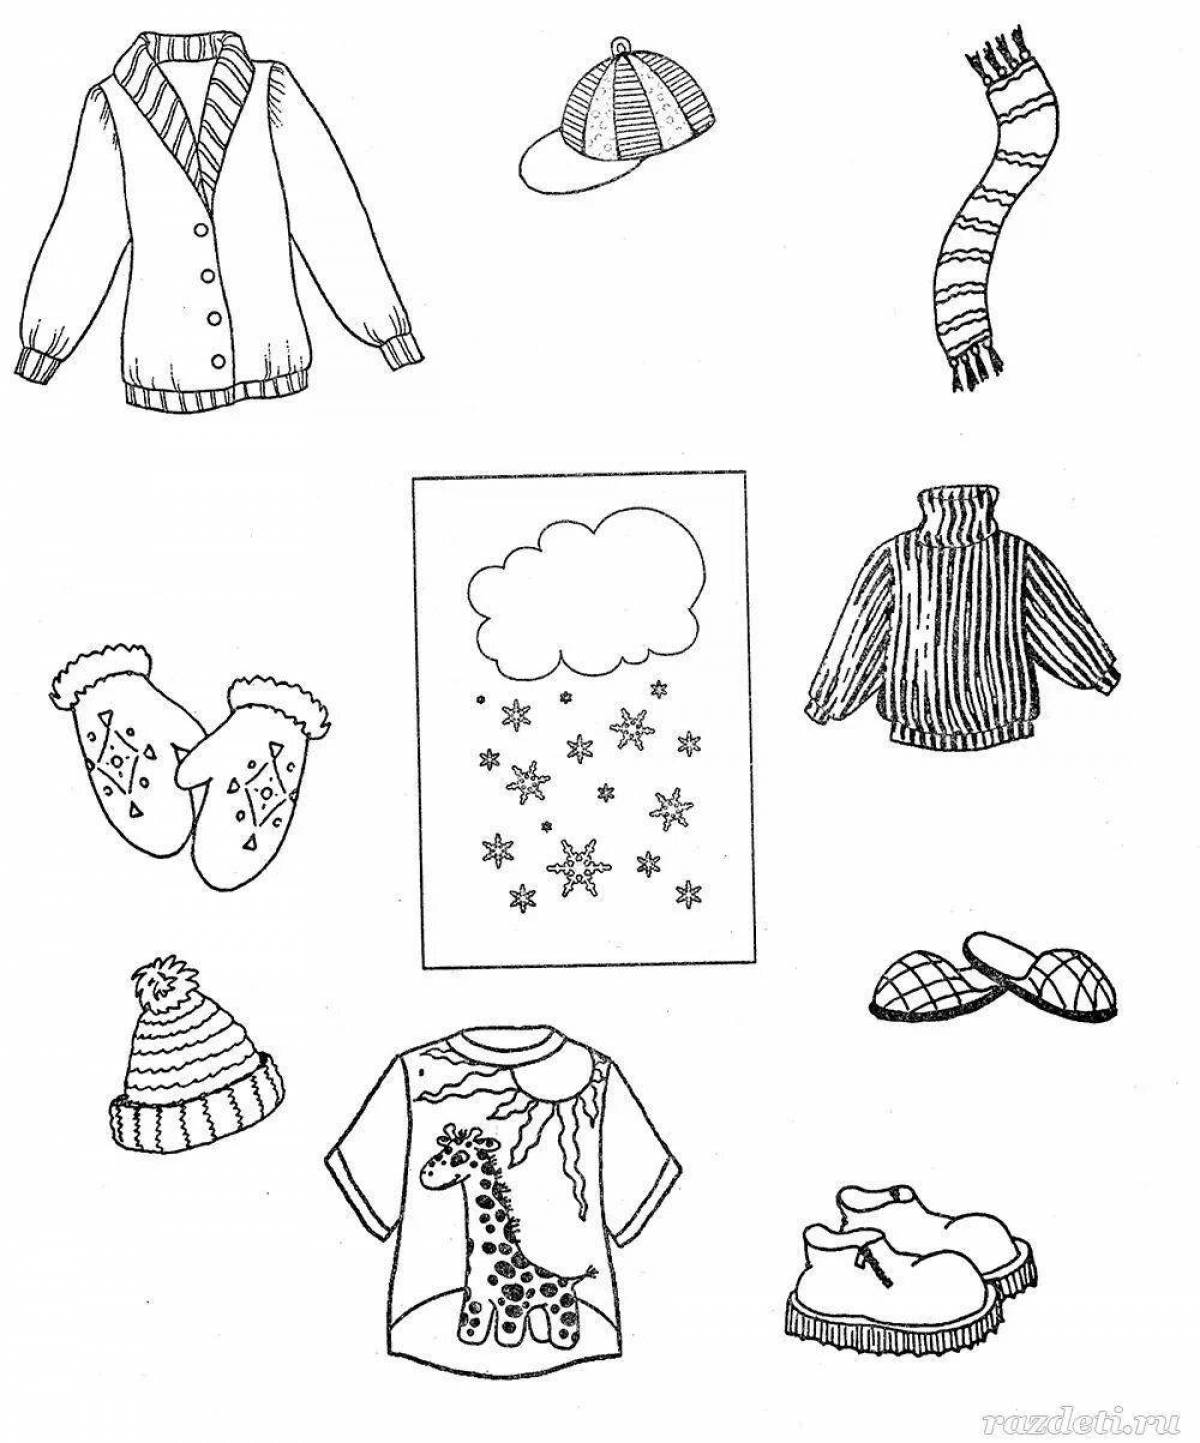 Coloured shiny winter clothes for preschoolers coloring book